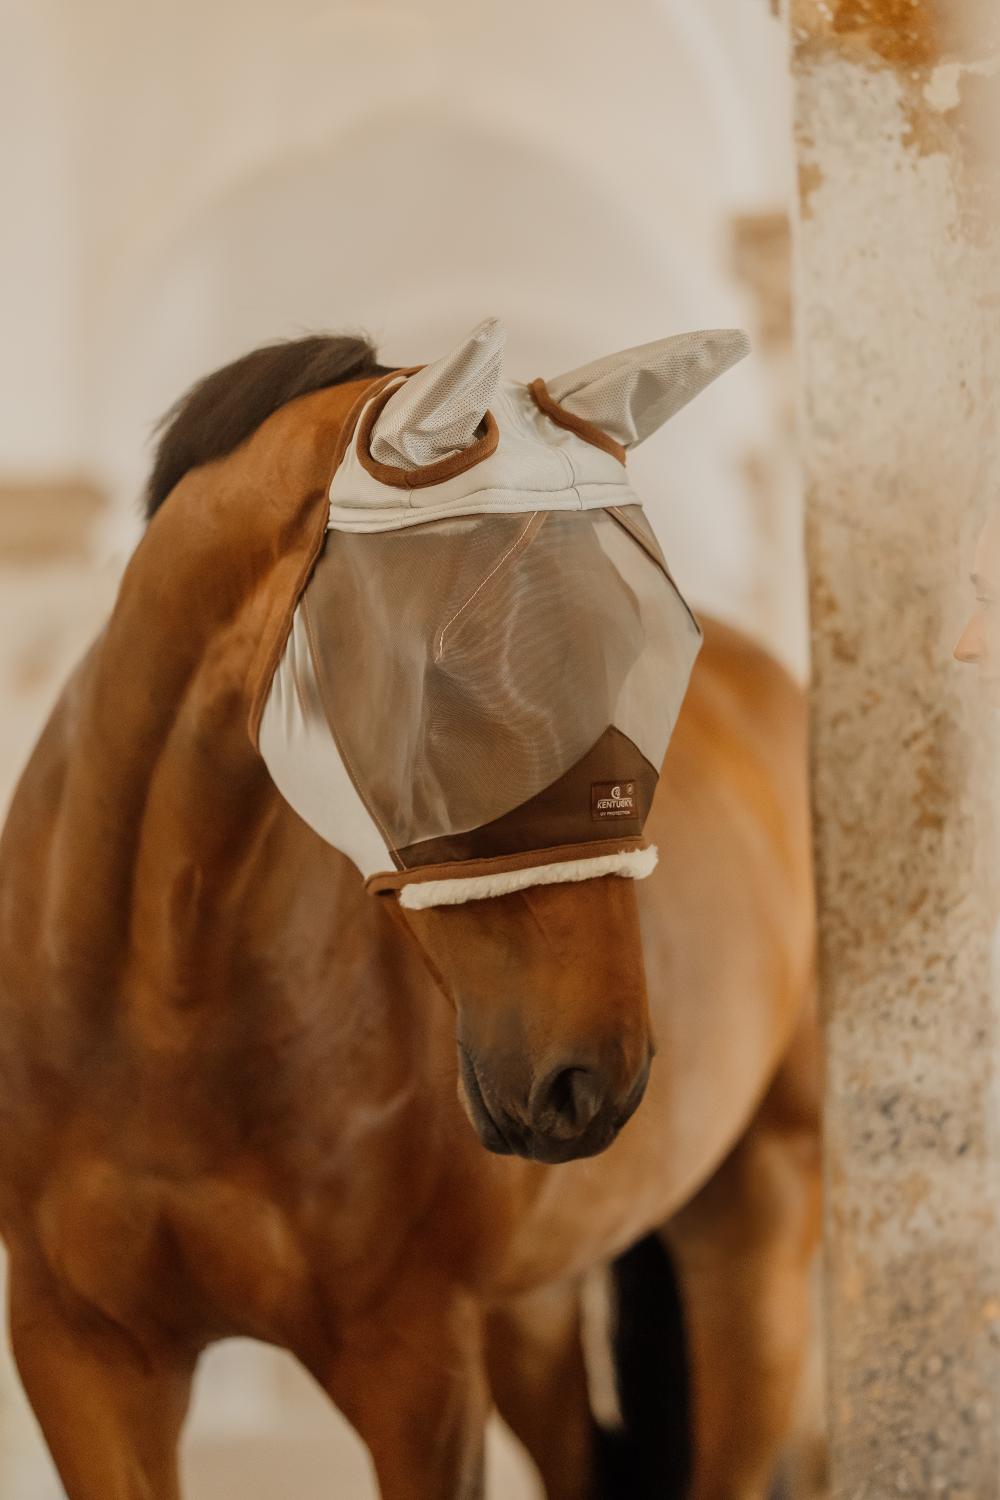 Fly Mask Skin Friendly with ears